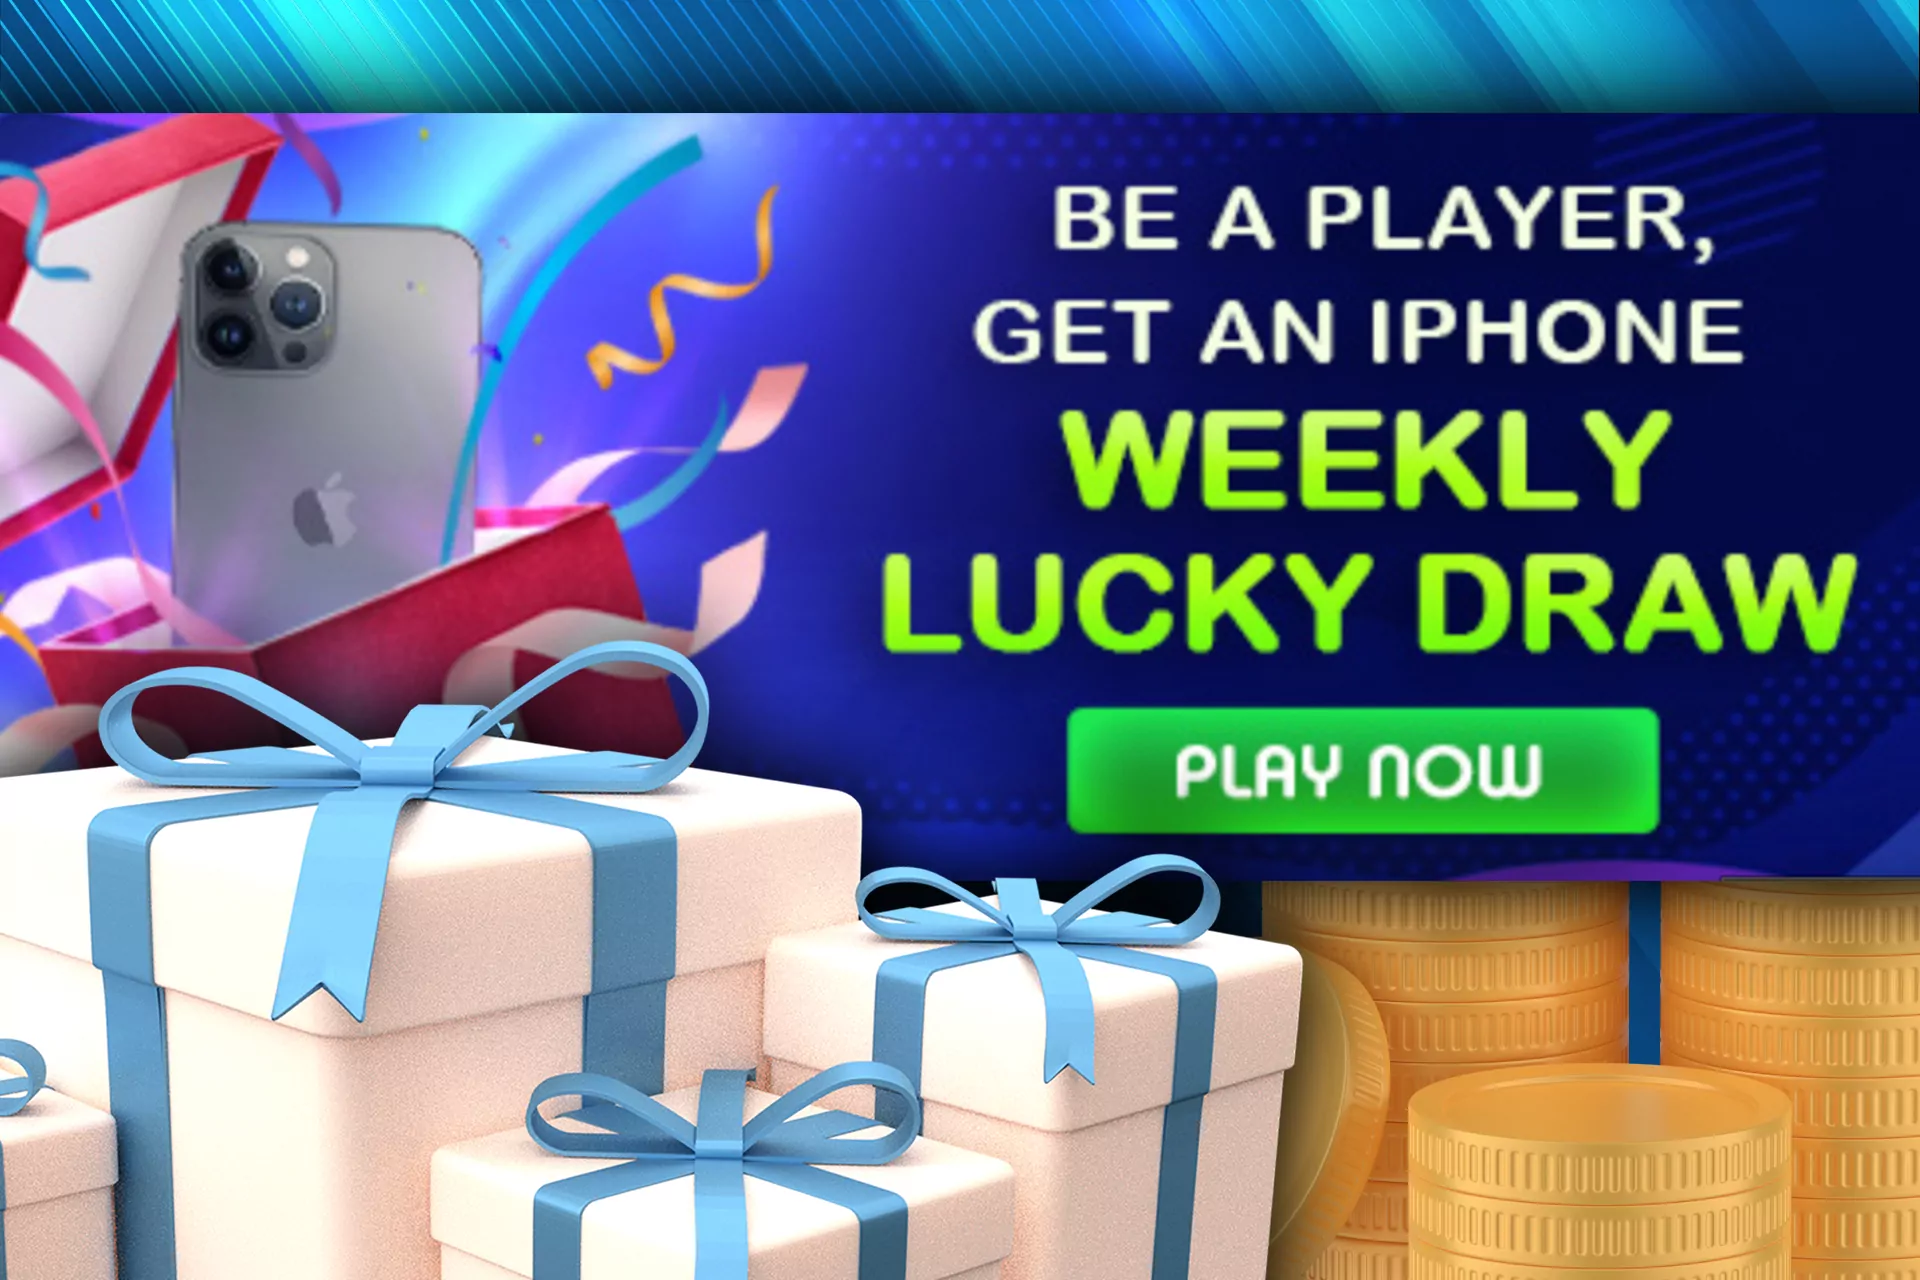 You can win a iPhone by participating in this promo.